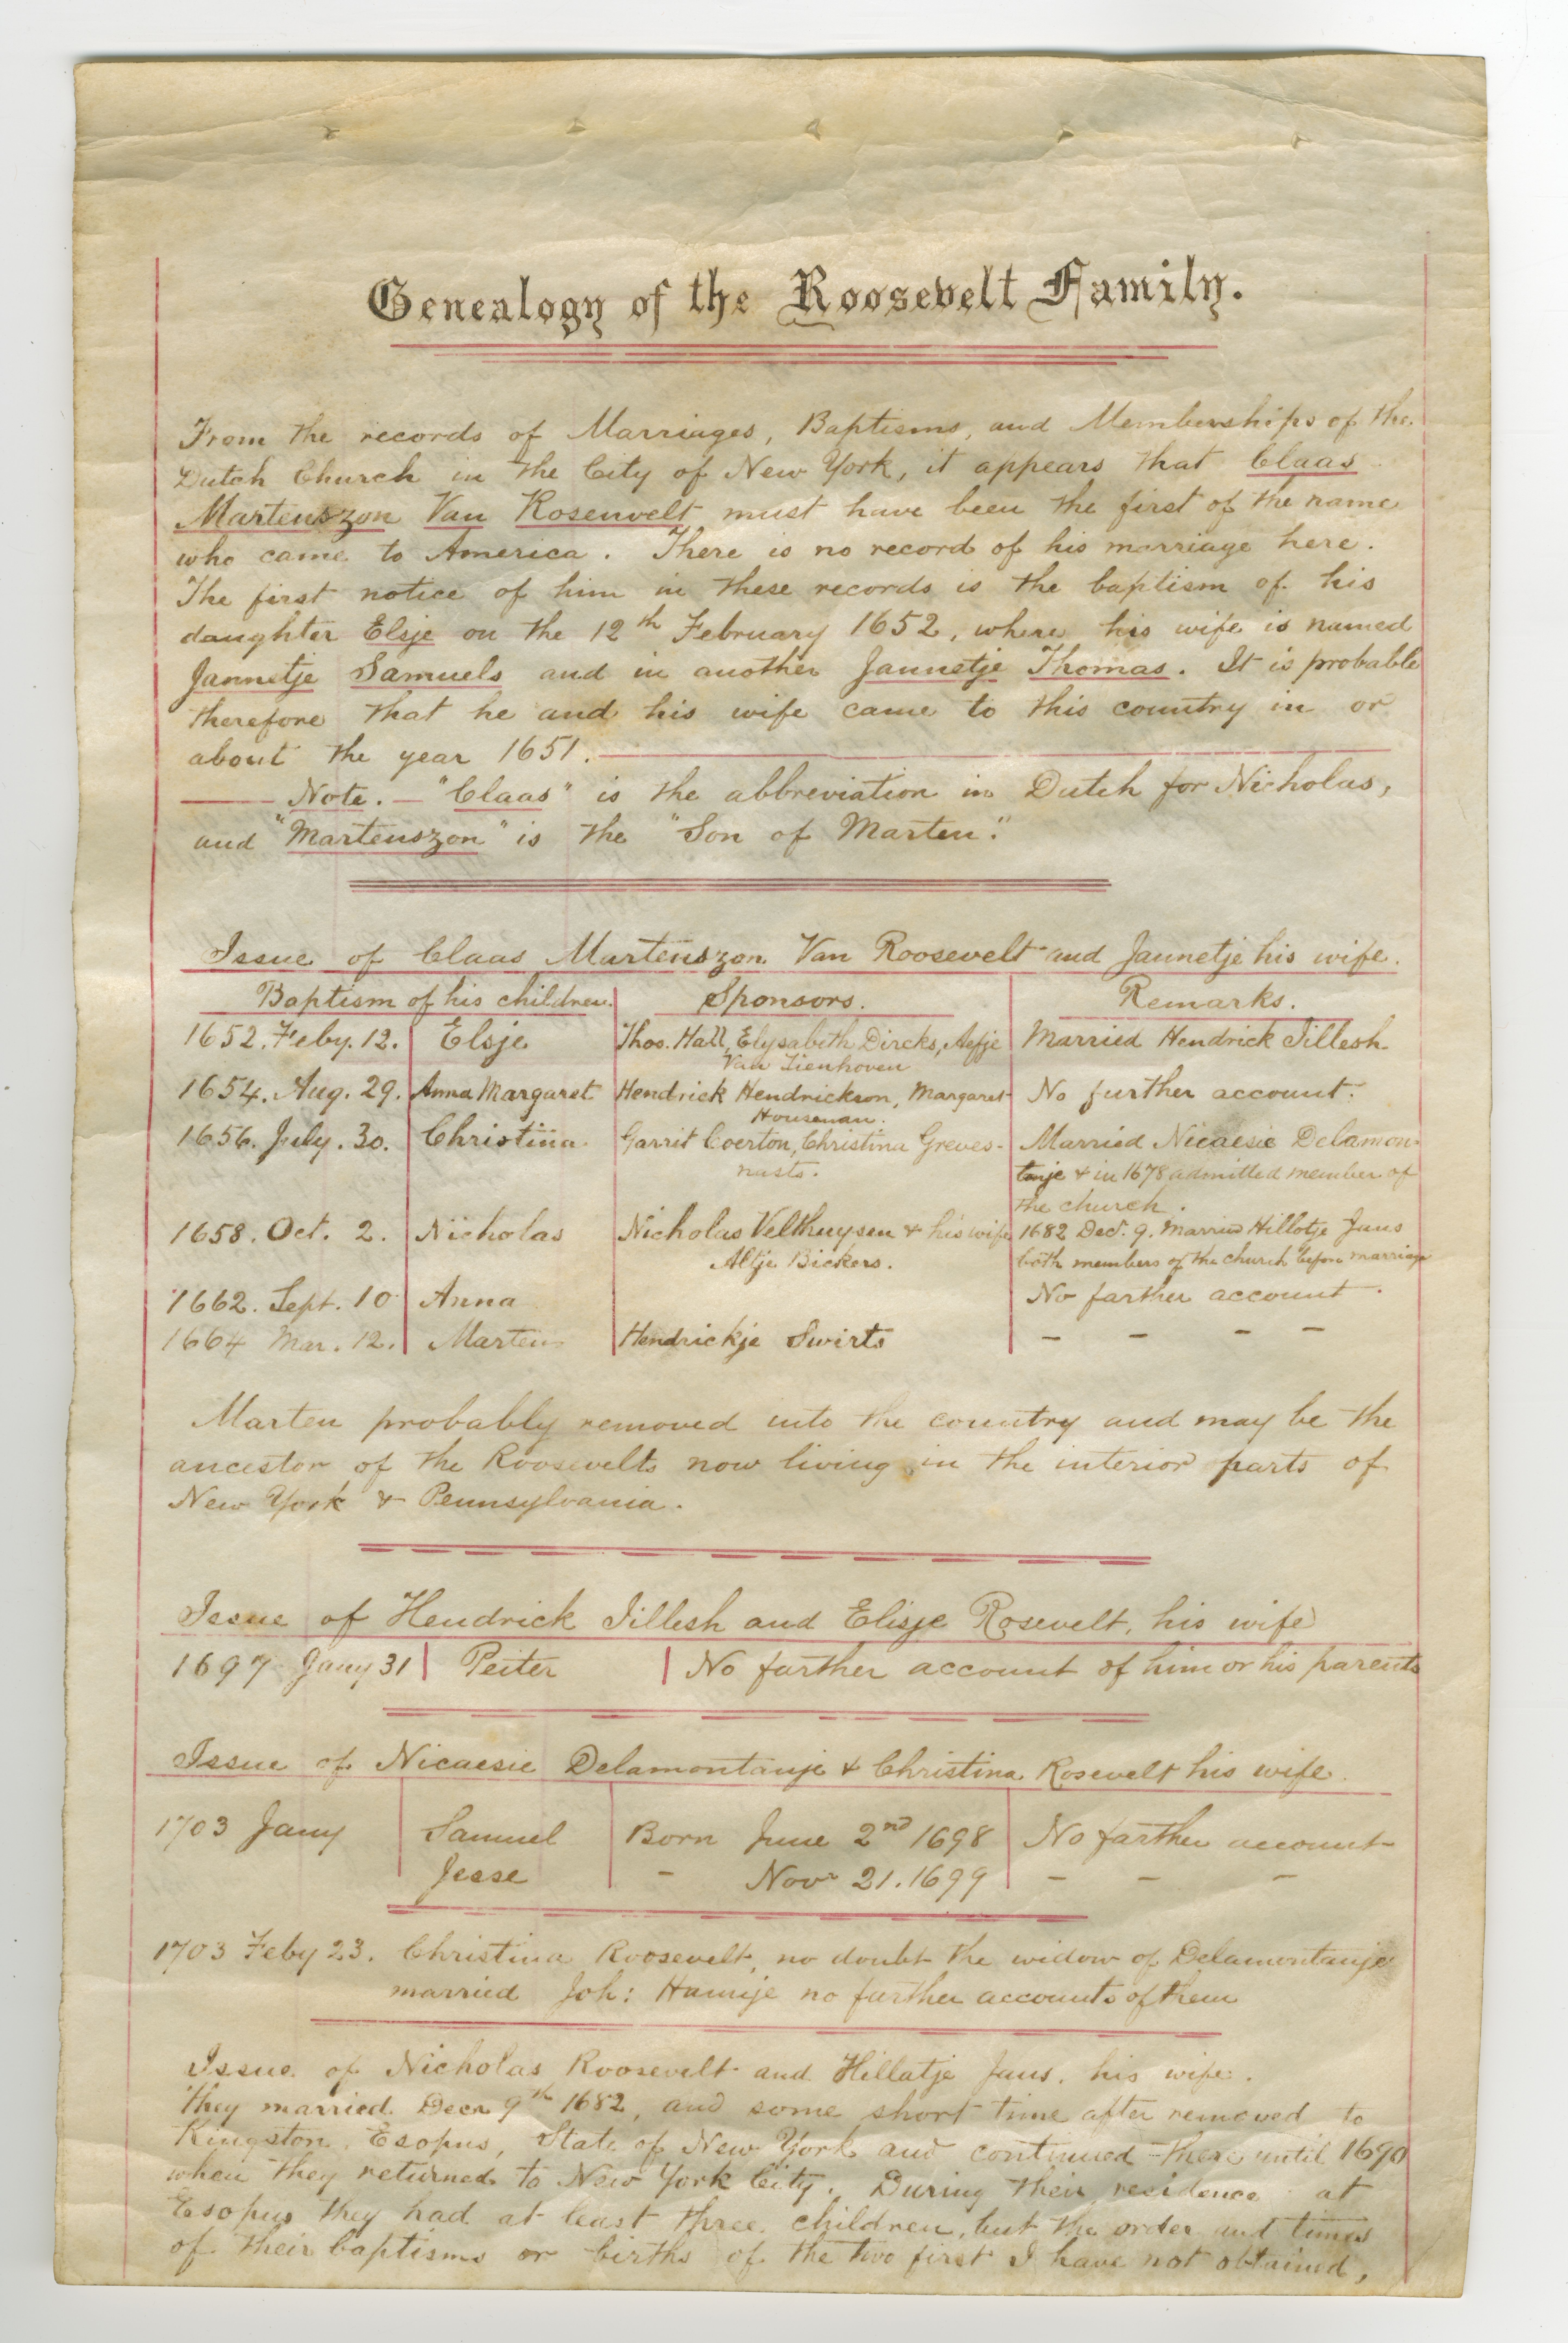 Last Will and Testament of Robert Barnwell Roosevelt (1829–1906), an uncle of President Theodore Roosevelt, and a member of the United States Congress